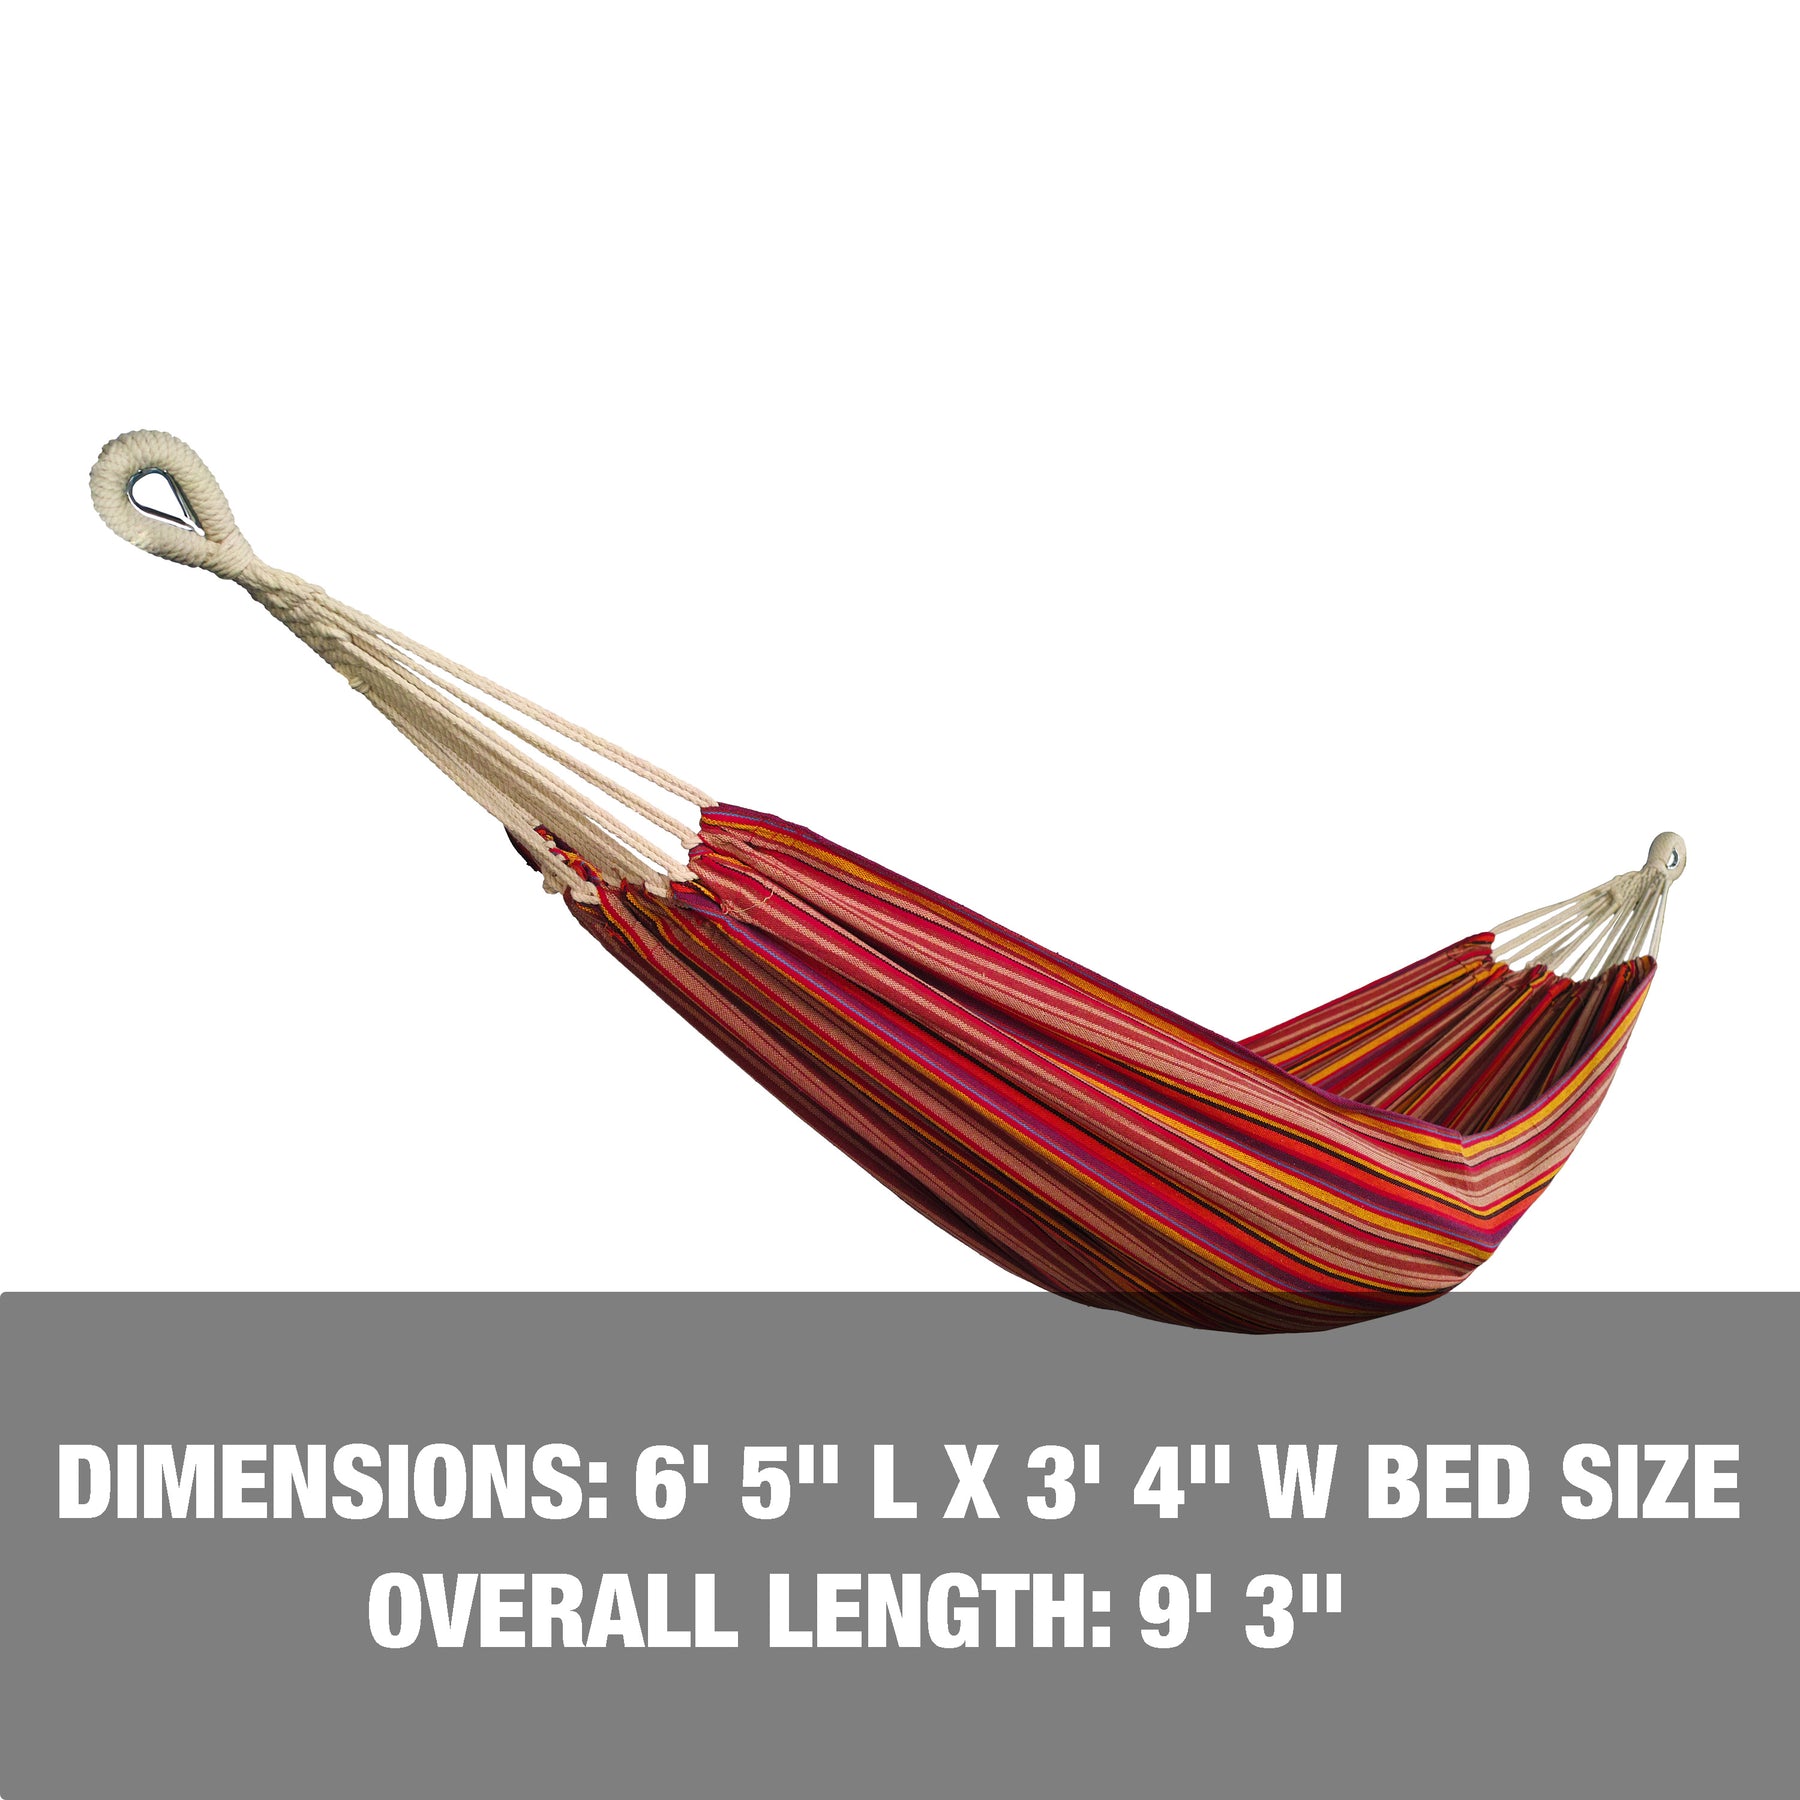 Dimensions are 6 feet and 5 inches long, 3 feet and 4 inches wide, with an overall length of 9 feet and 3 inches.